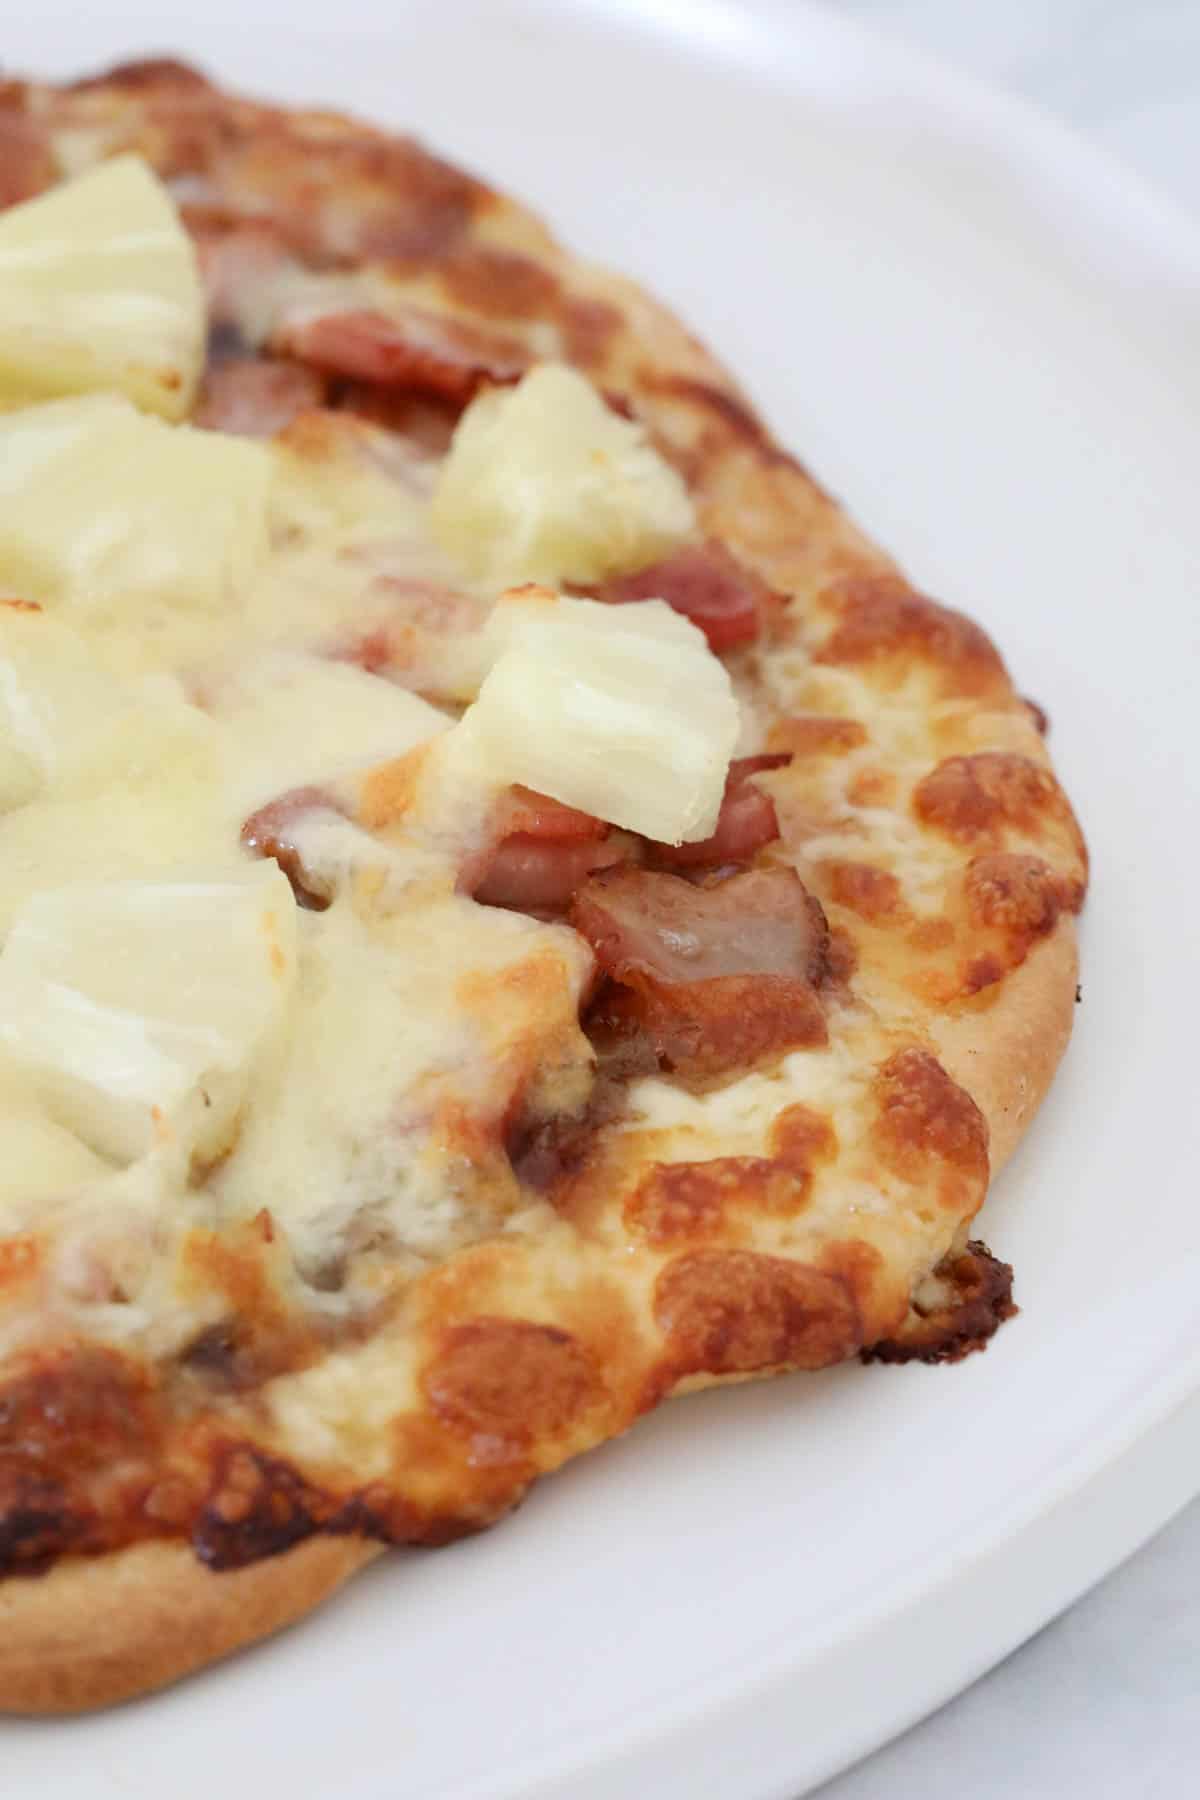 A pizza topped with cheese, bacon and pineapple.